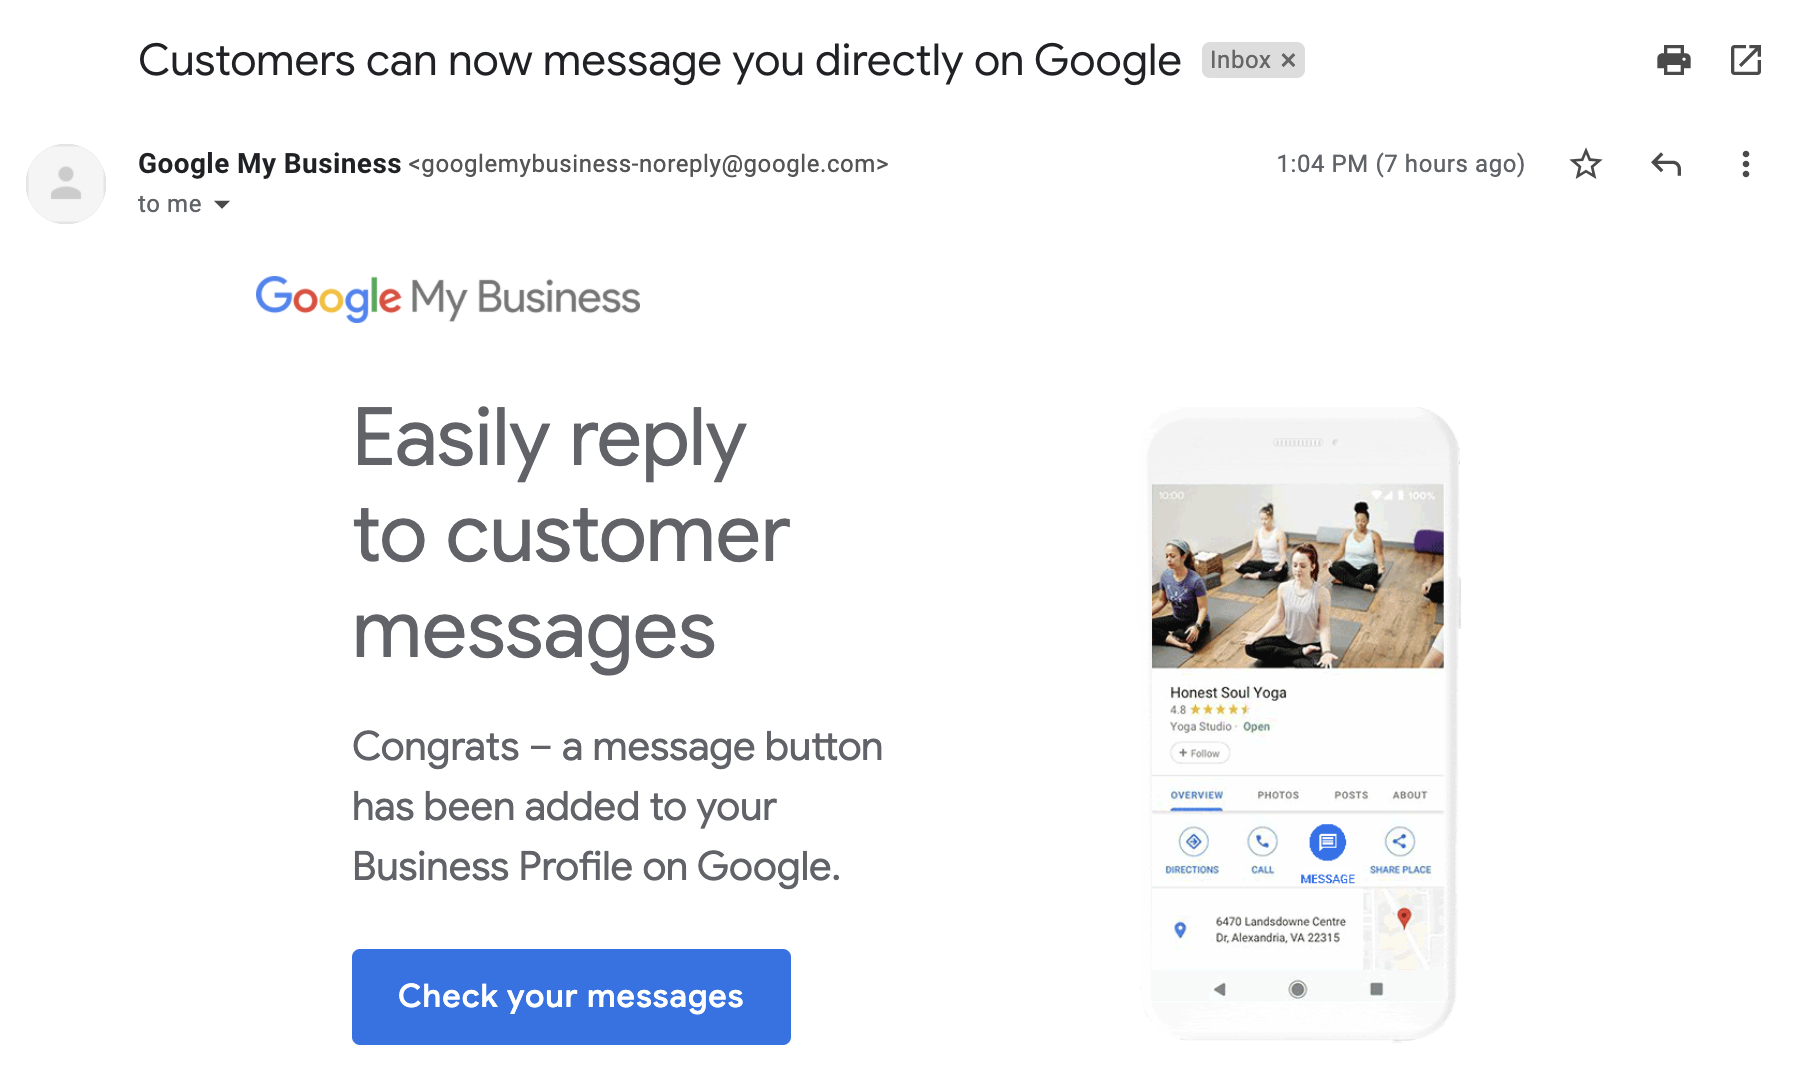 Email notification from Google about a newly activated Chat feature on Google Maps